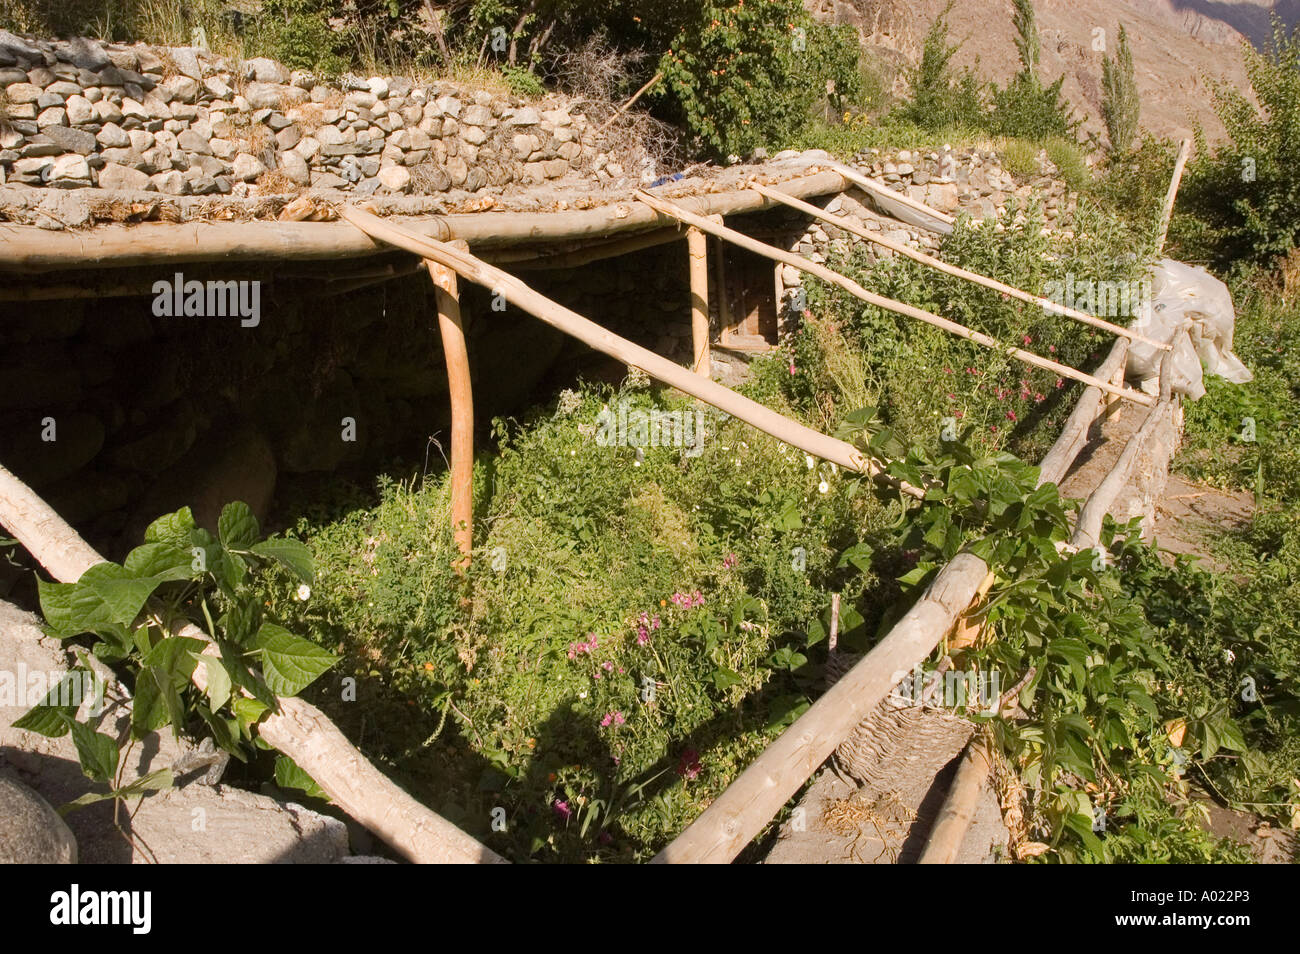 Open greenhouse for planting vegetables in Dha Hanu village Ladakh Kashmir India Stock Photo